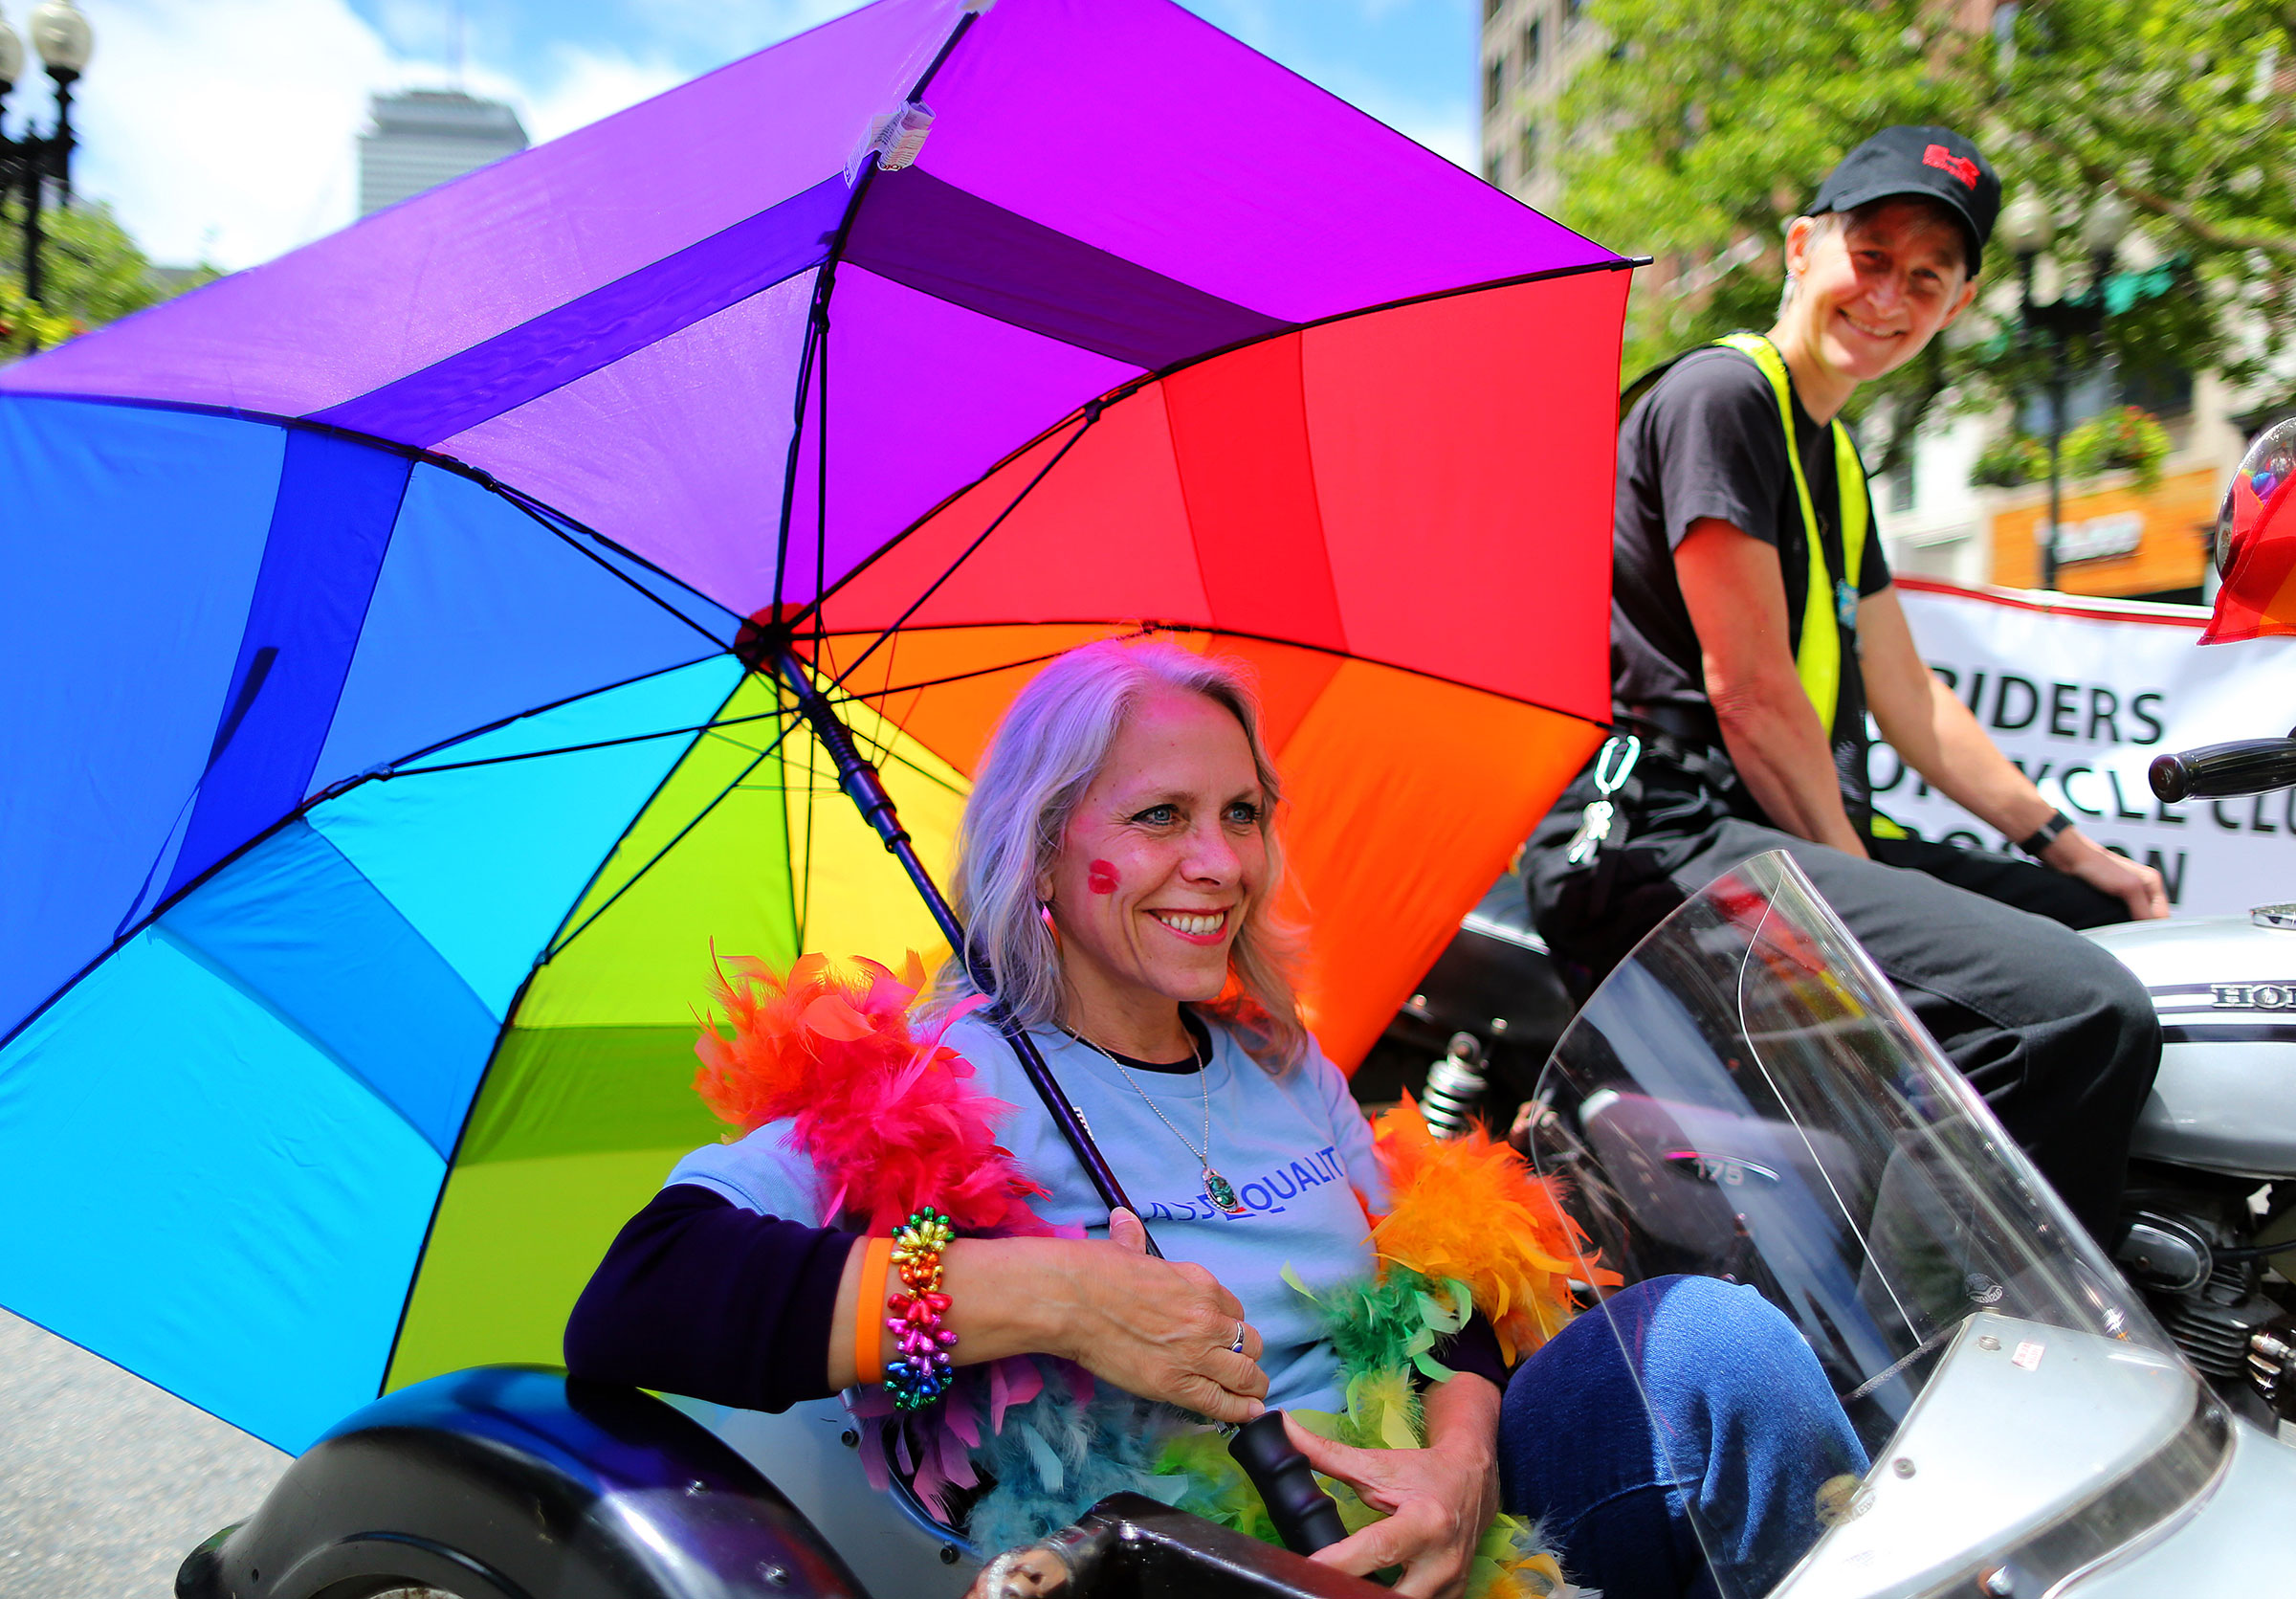 Robyn Ochs, left, gets a ride in a motorcycle sidecar from Peg Preble at the annual Boston Pride Parade on June 8, 2013. (John Tlumacki—The Boston Globe/Getty Images)